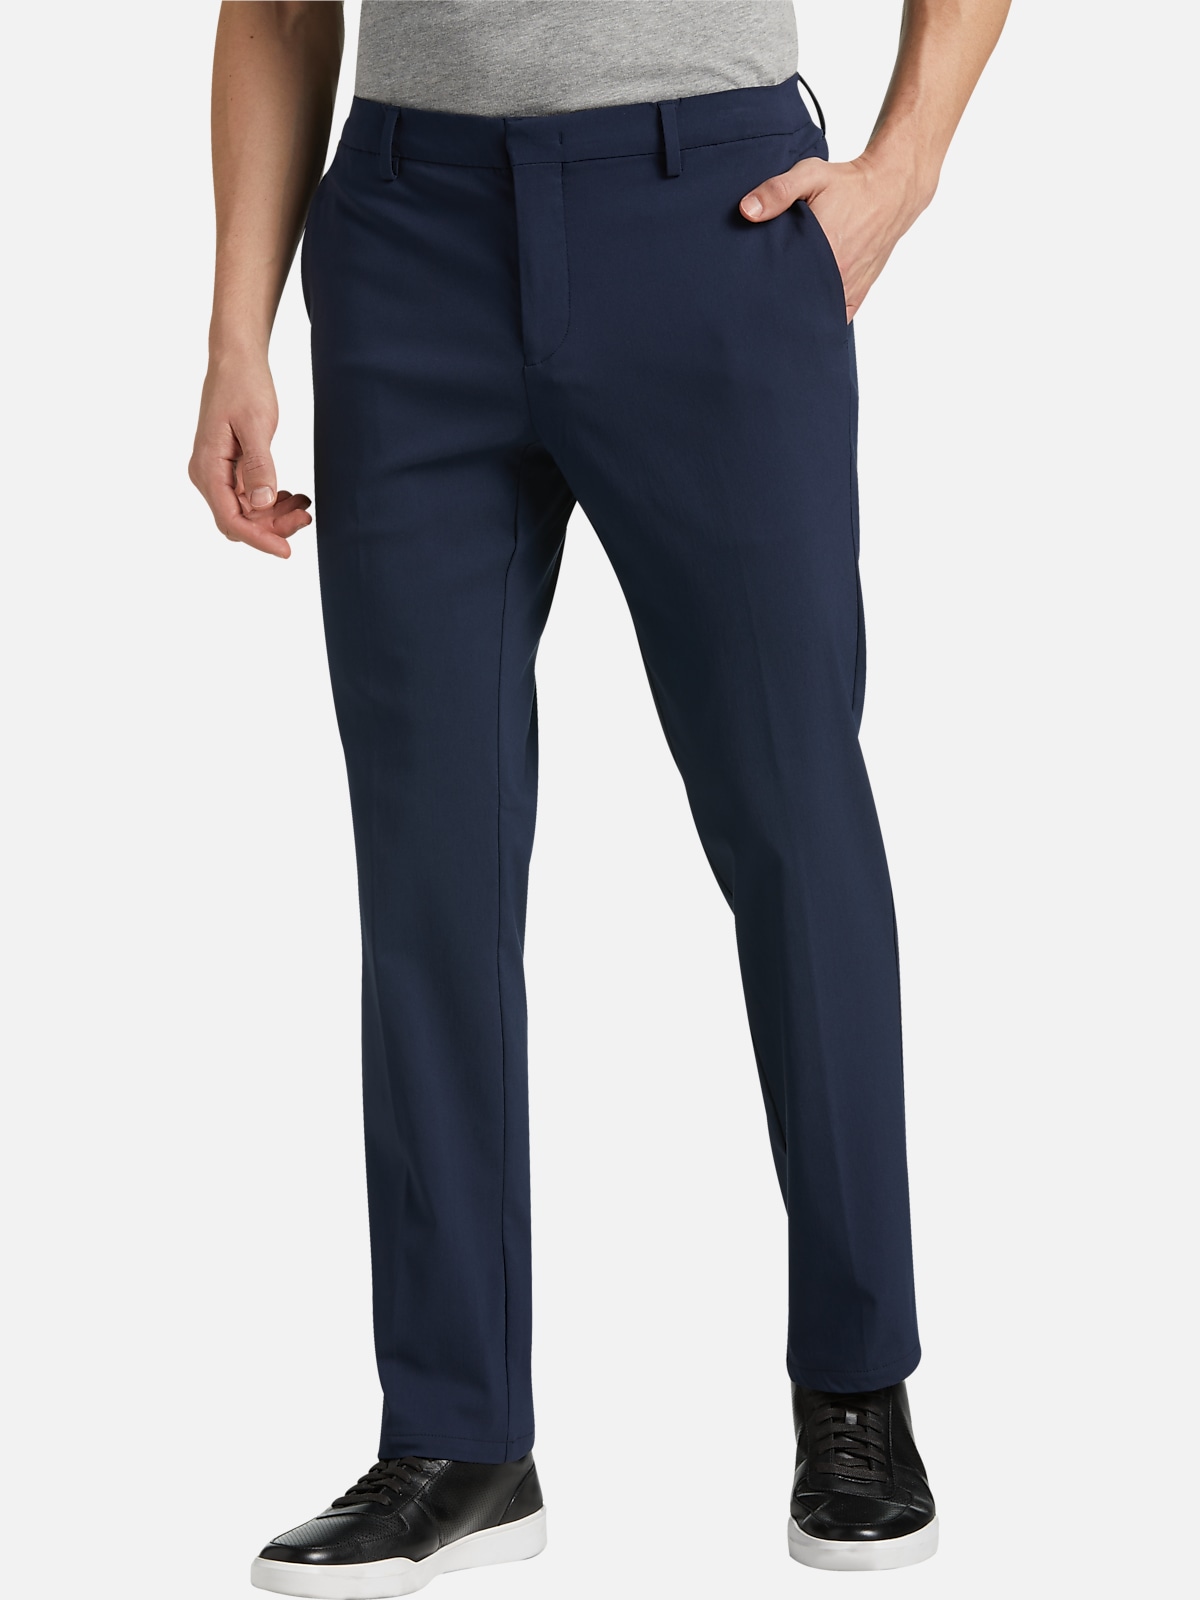 Awearness Kenneth Cole Slim Fit Performance Pants | All Sale| Men's ...